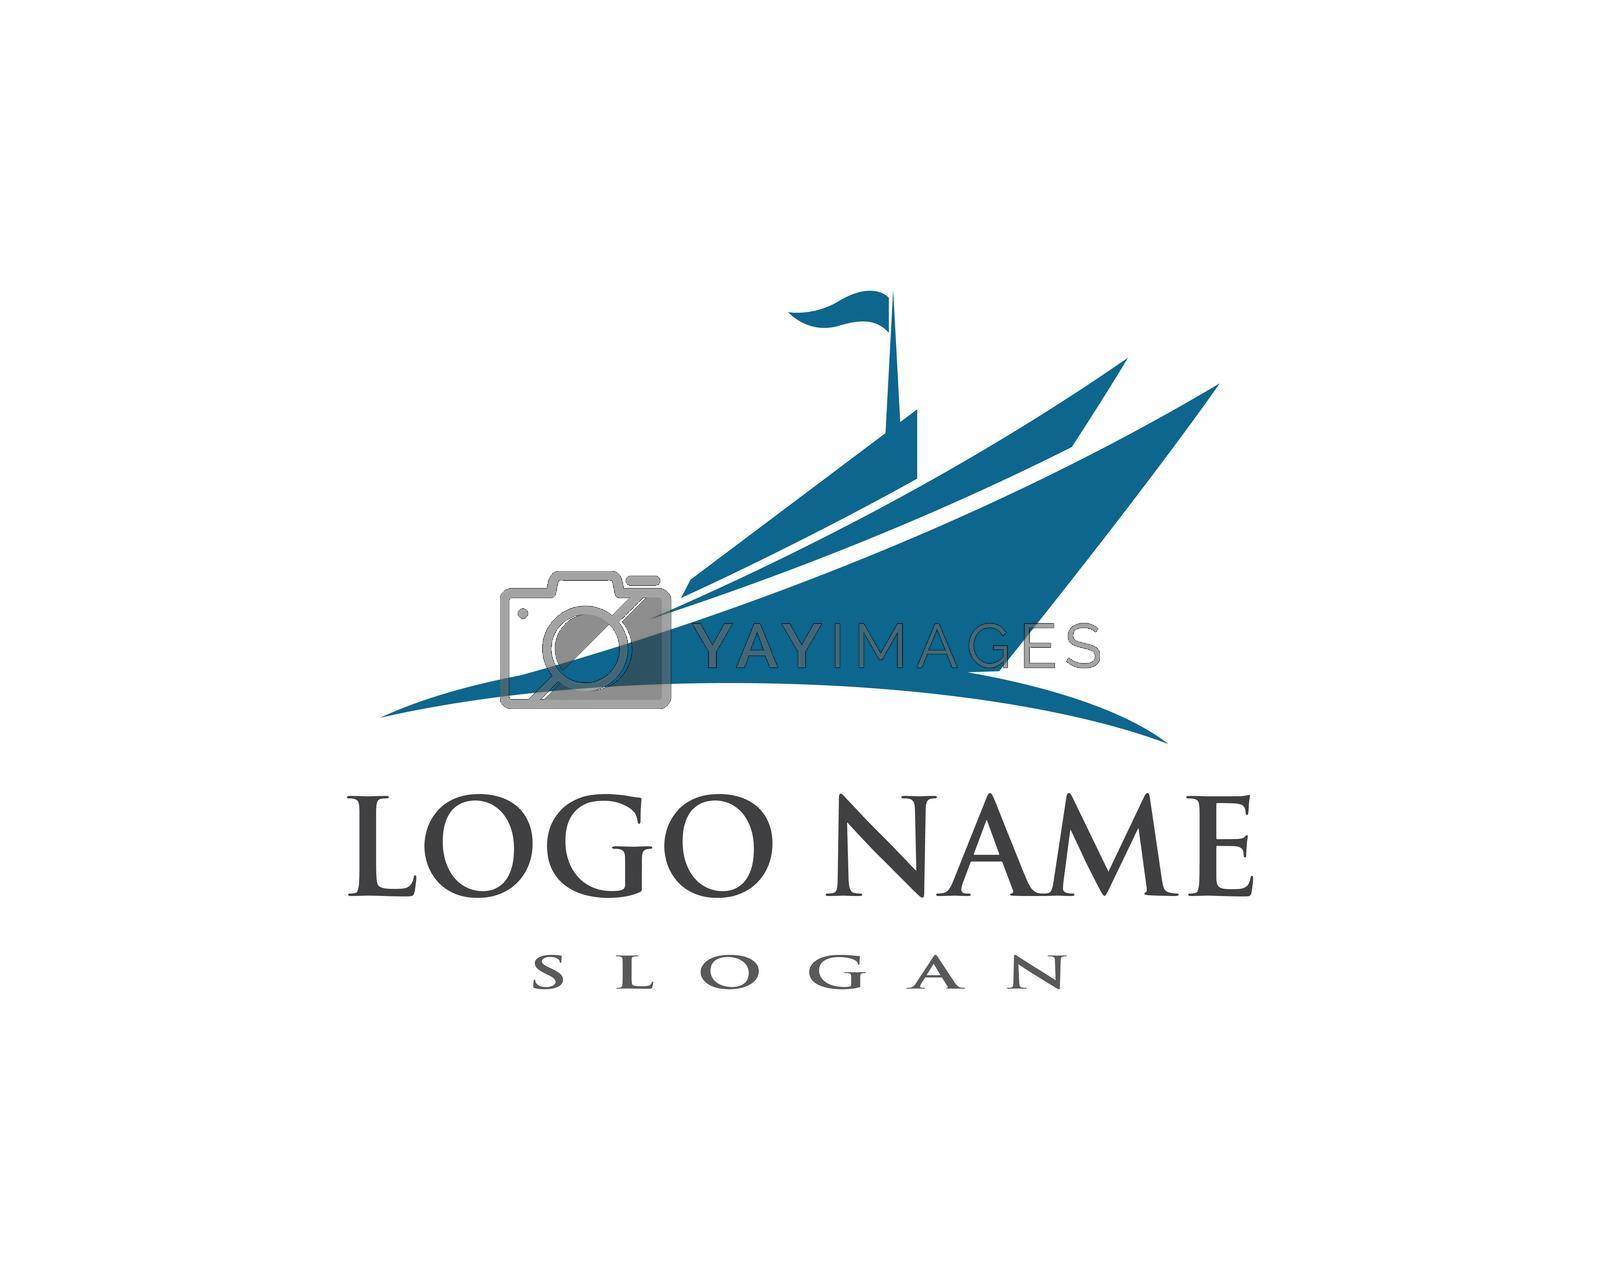 Royalty free image of cruise ship Logo Template by awk